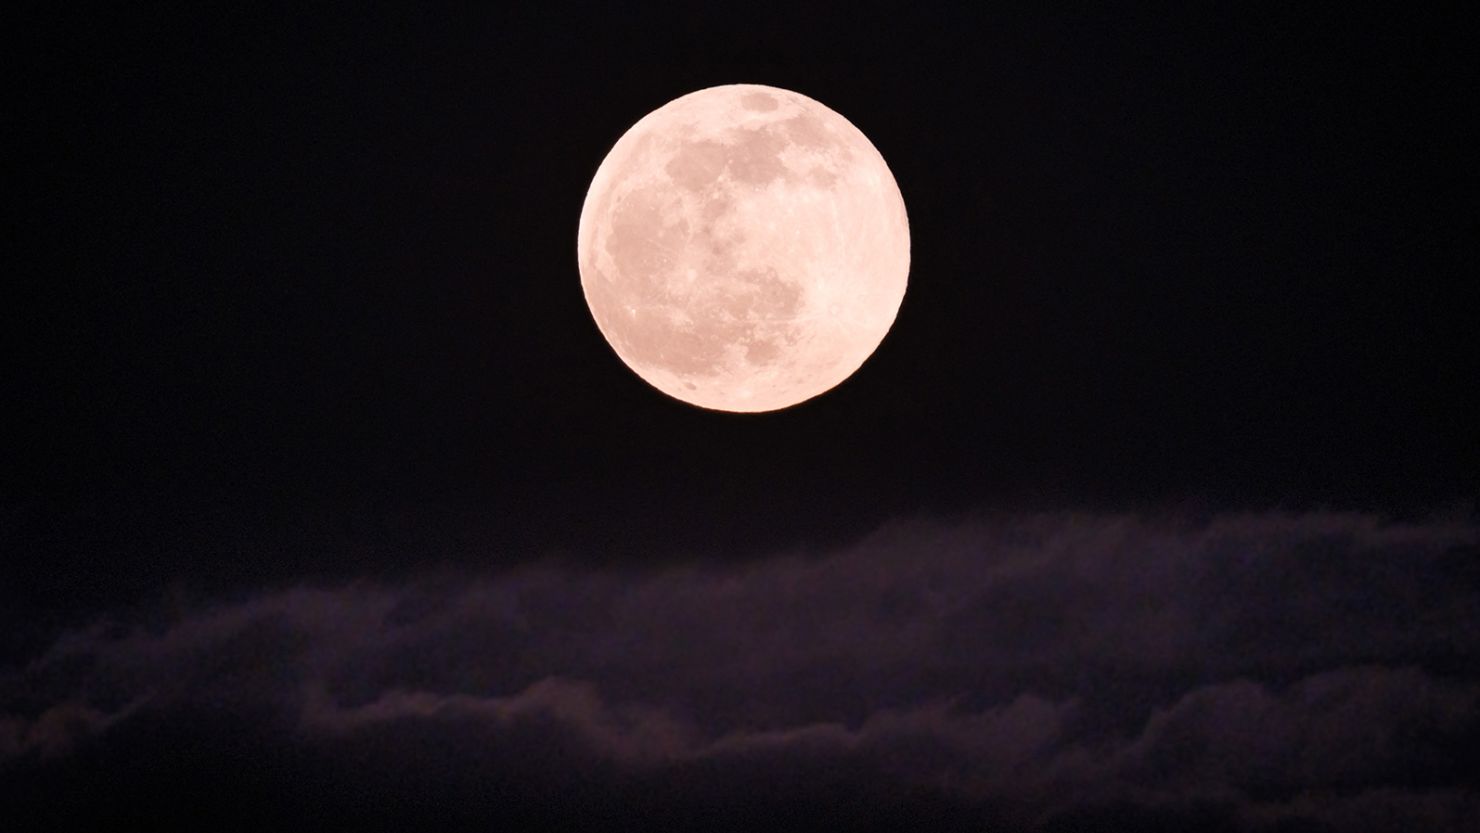 April's full pink moon will rise this week